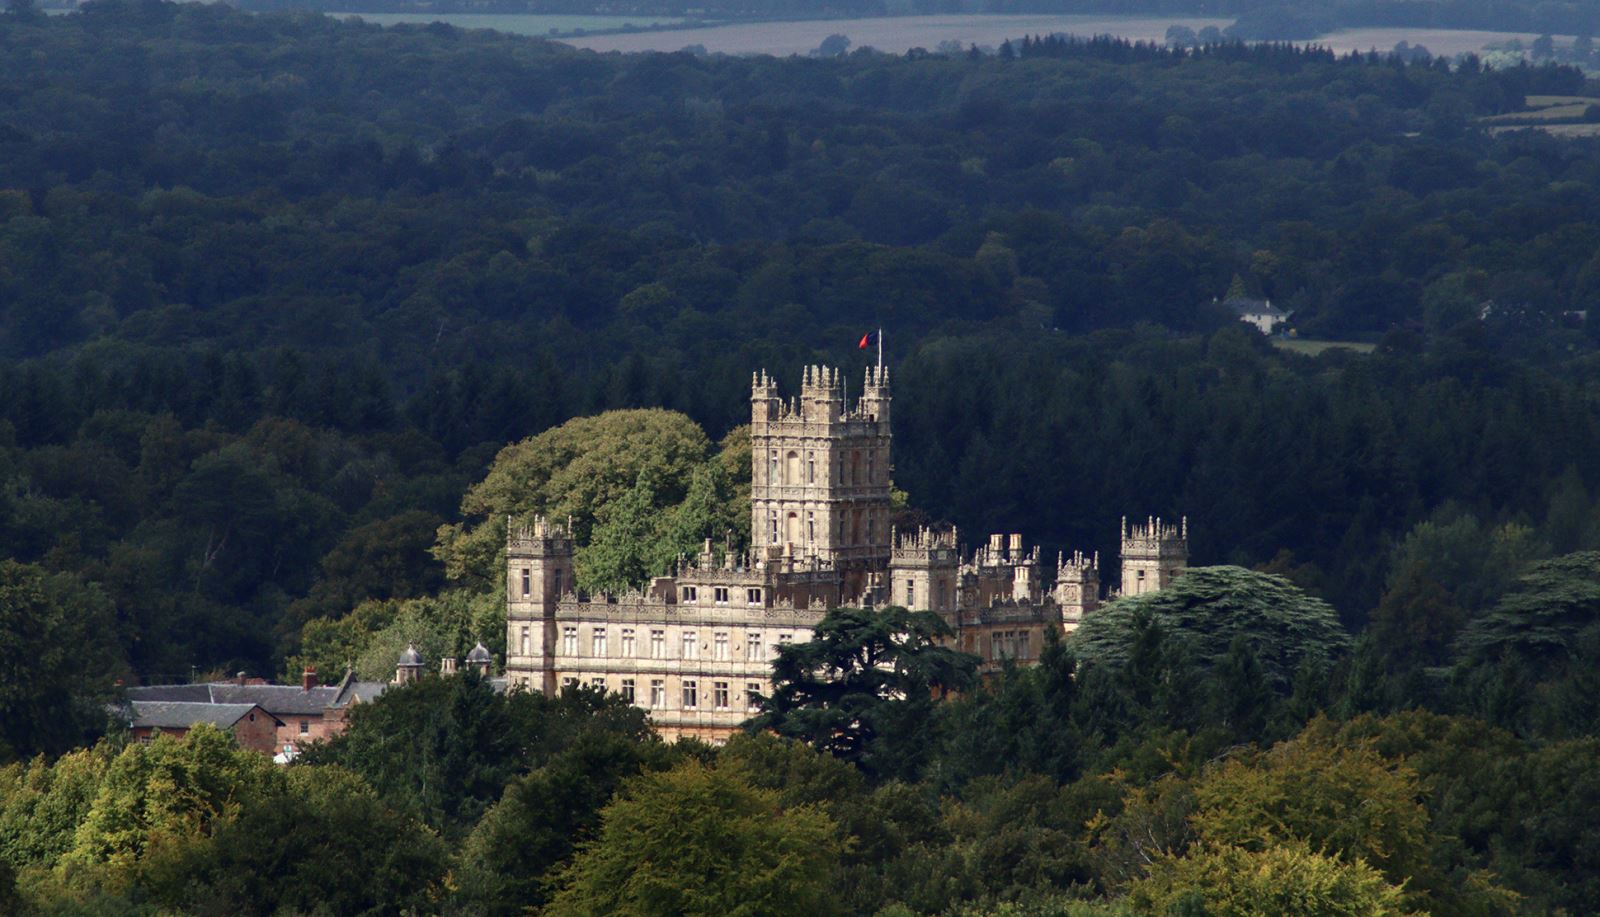 View of Highclere Castle the real Downton Abbey